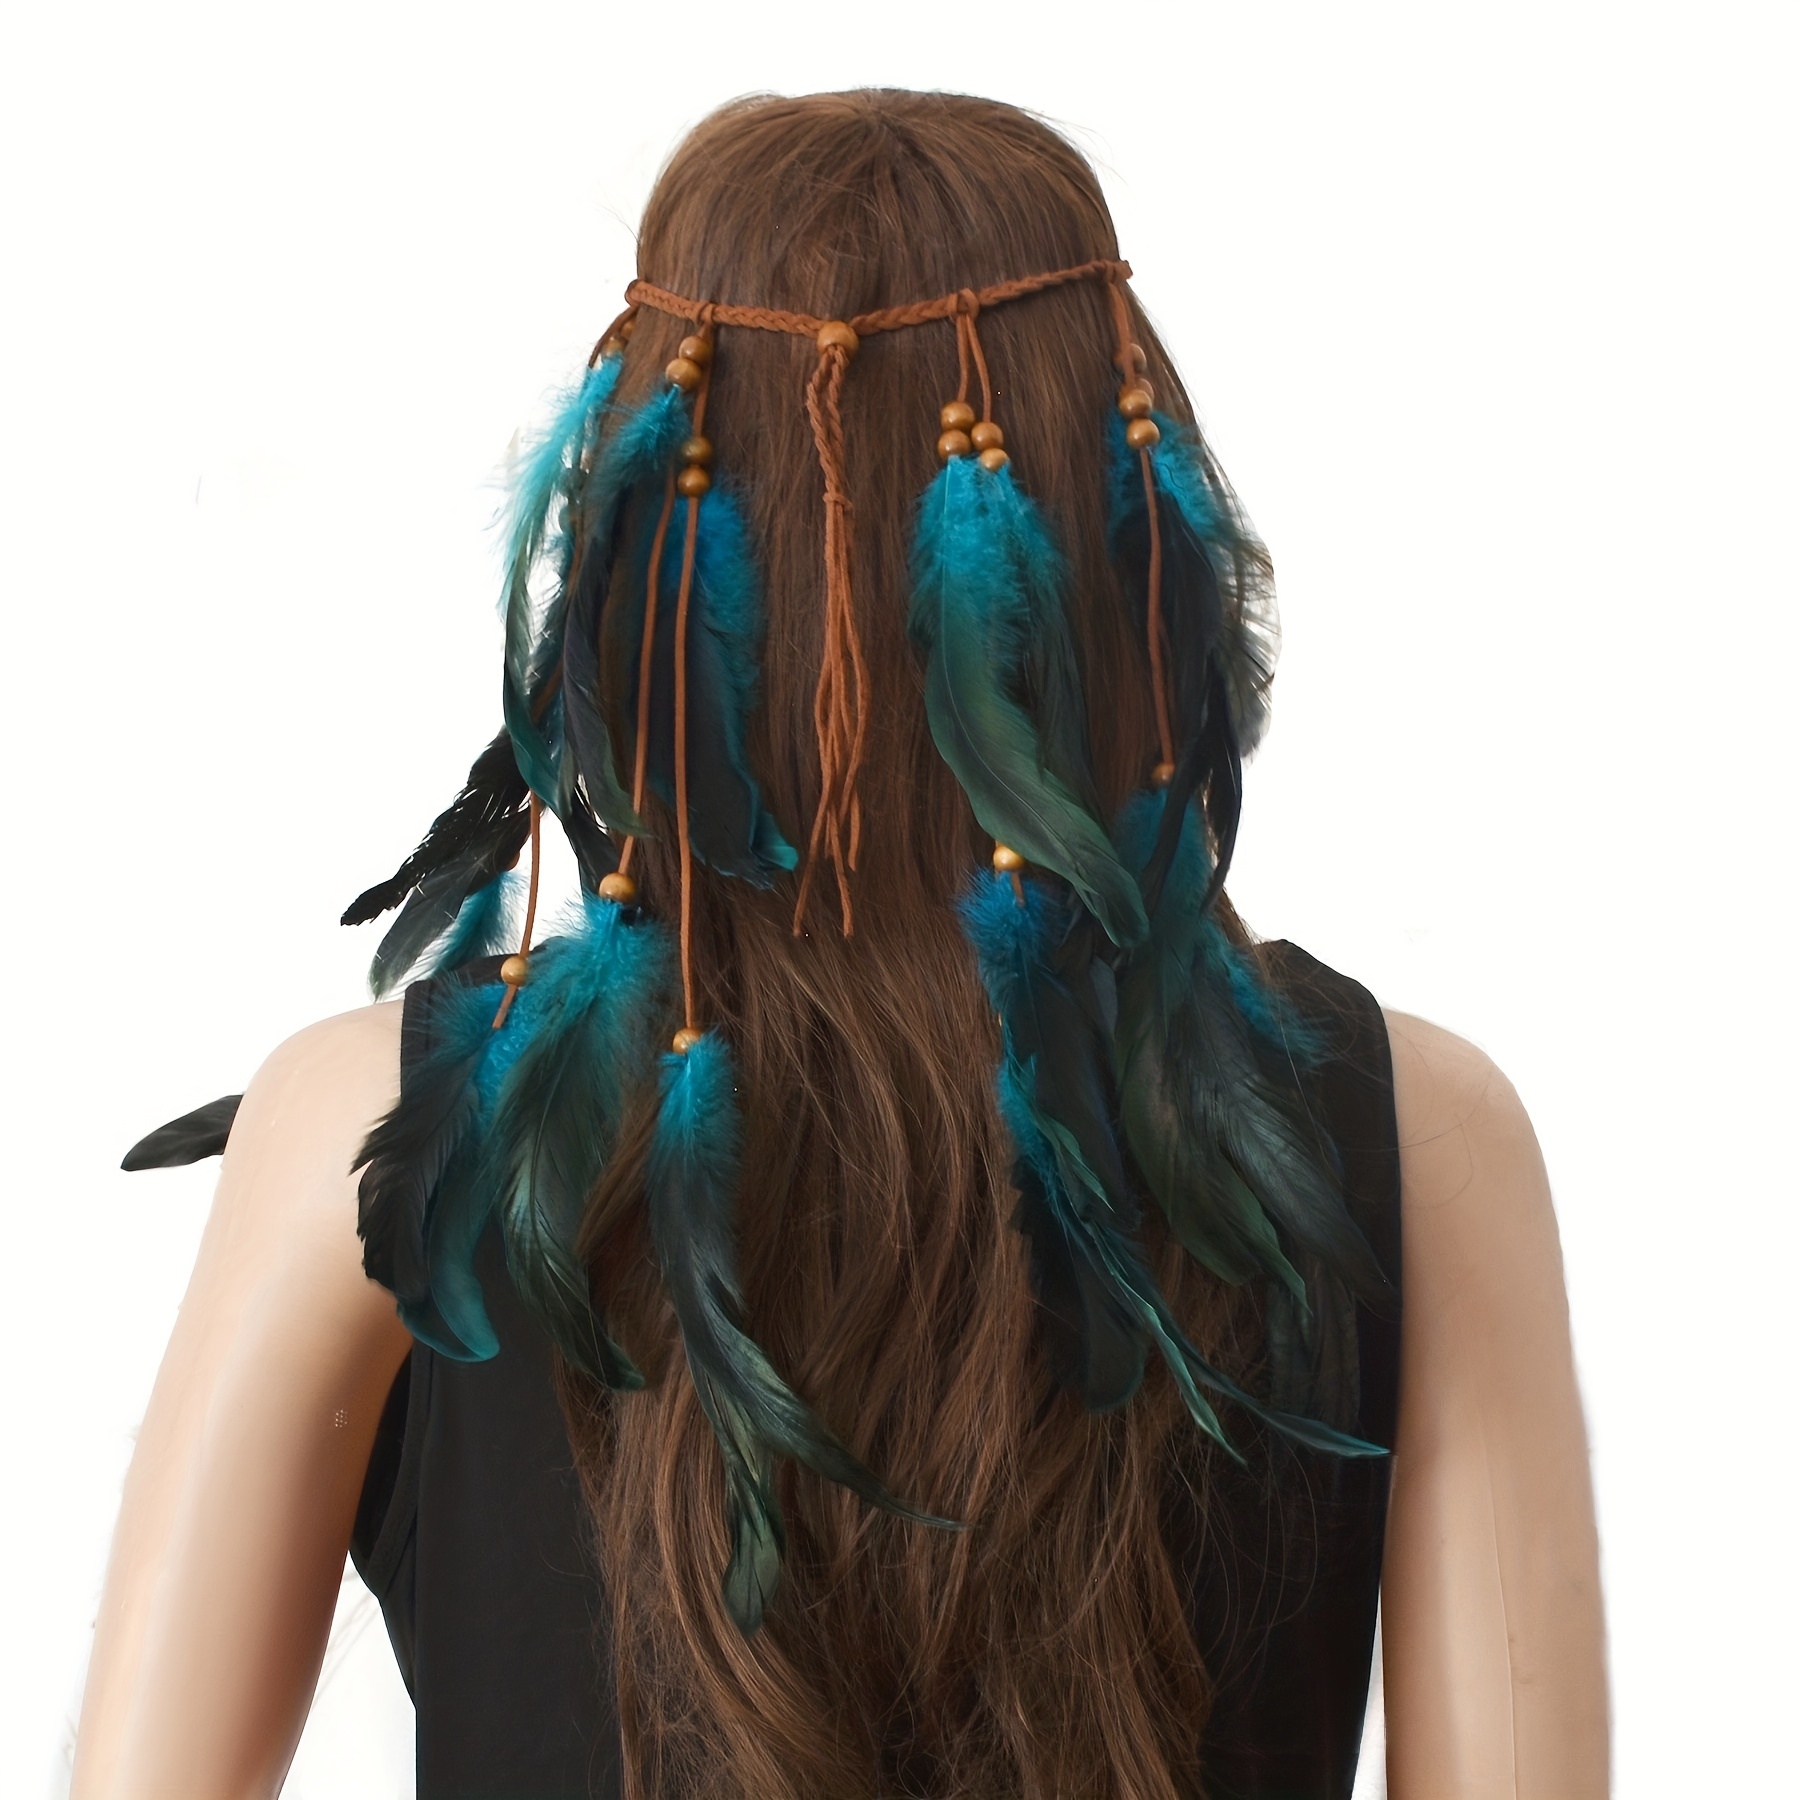 

Boho Faux Feather Headband Headpiece Headwear For Prom Events Costume Stage Performance